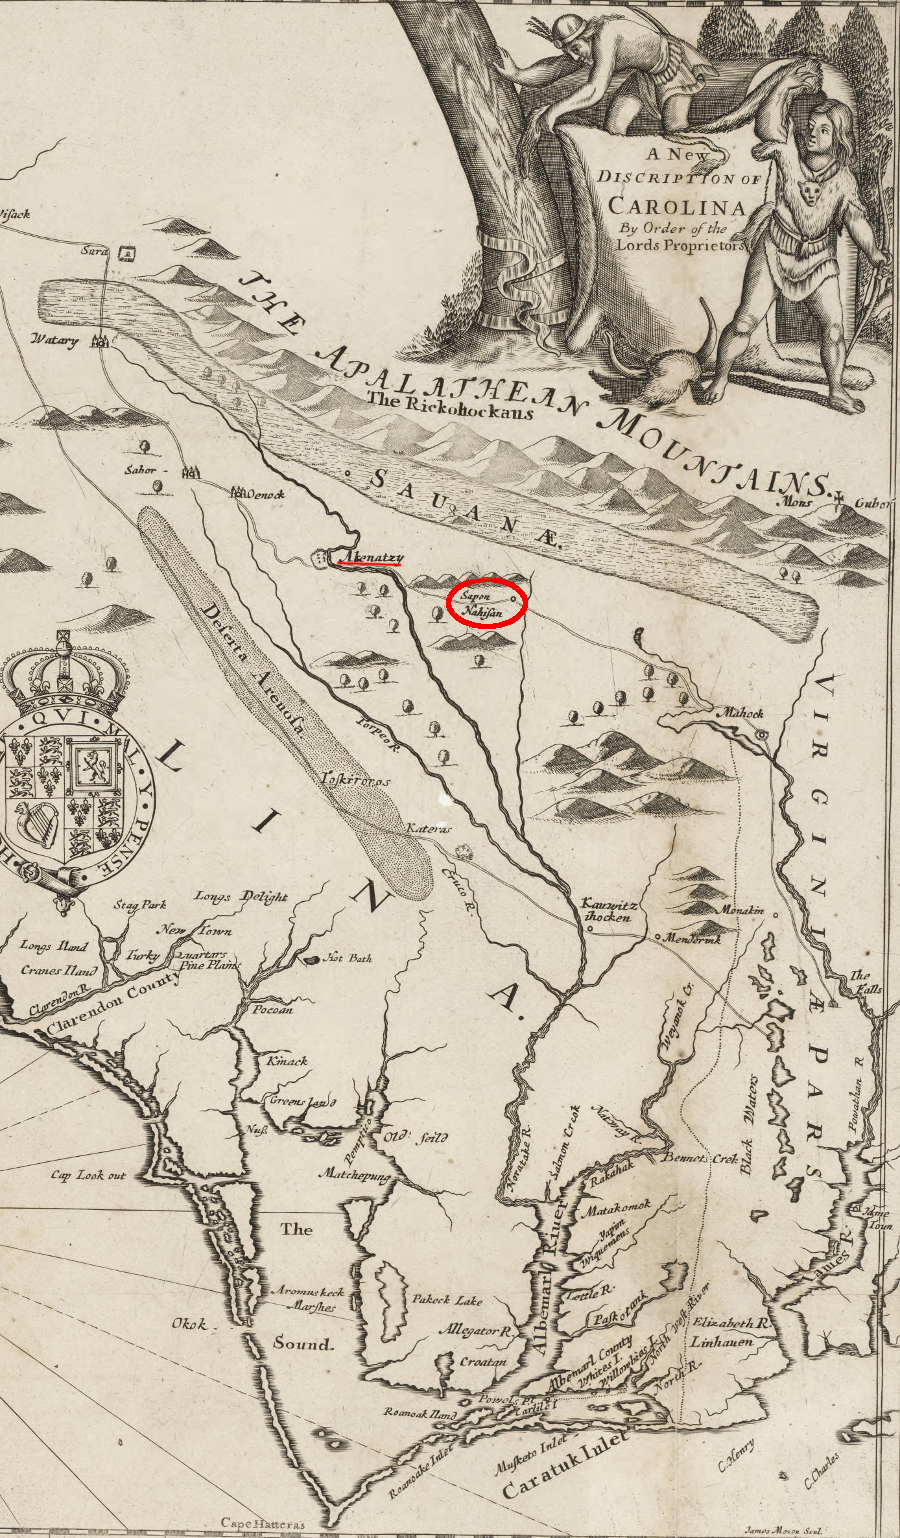 the Sappony lived in Sapona and Nahisan, as well as the Akenatzy (Occaneechi) town, when John Lederer explored south of the James River in 1669 and 1670 (on map, north is to the right)